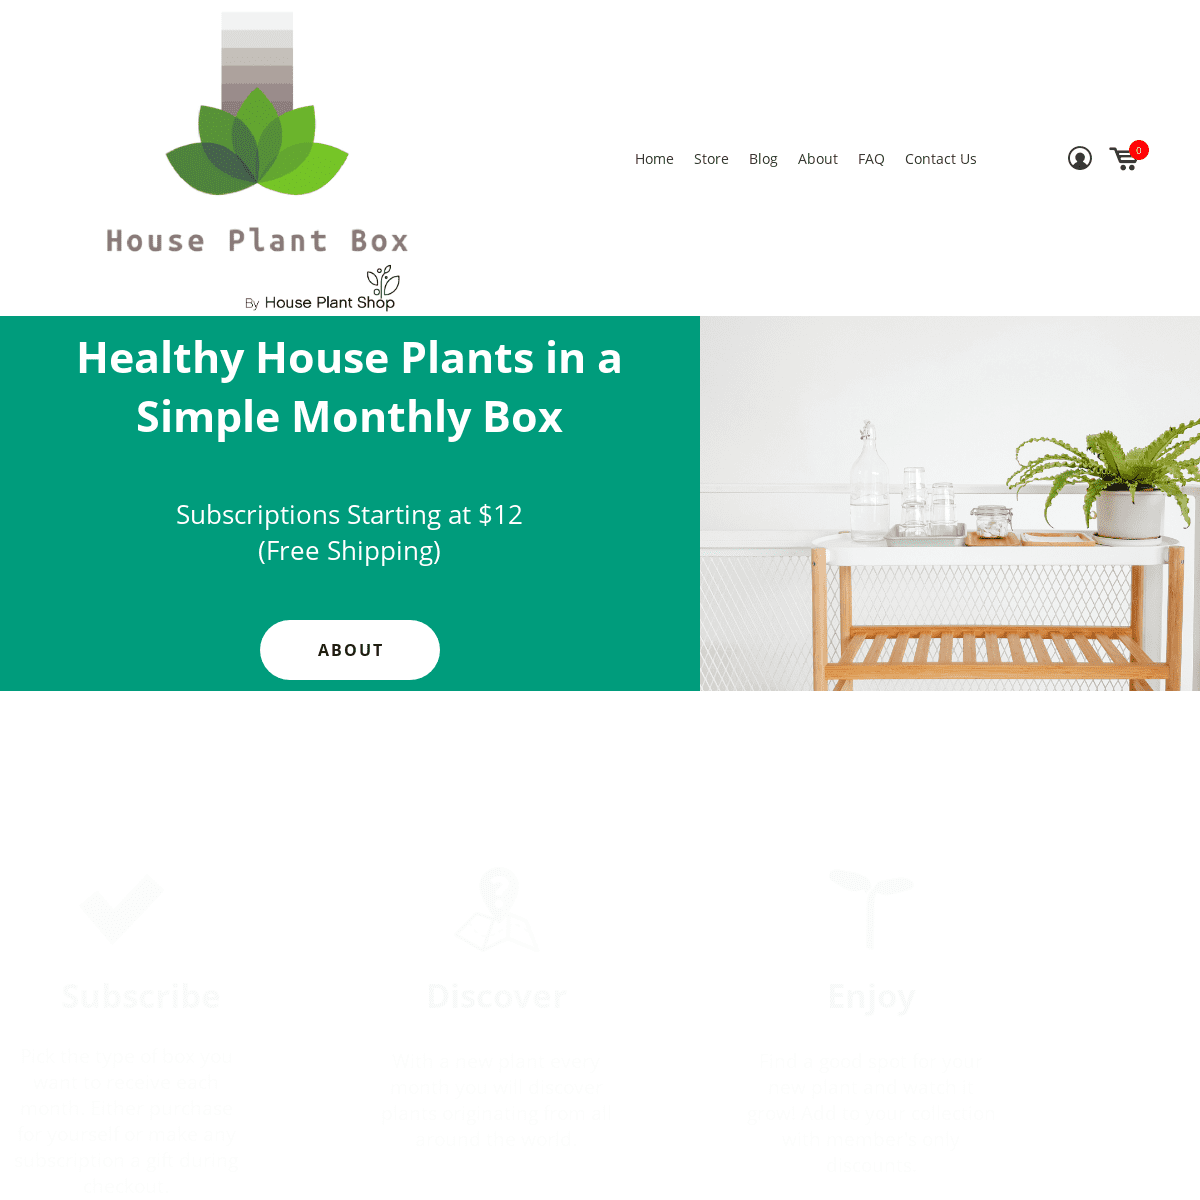 A complete backup of houseplantbox.com